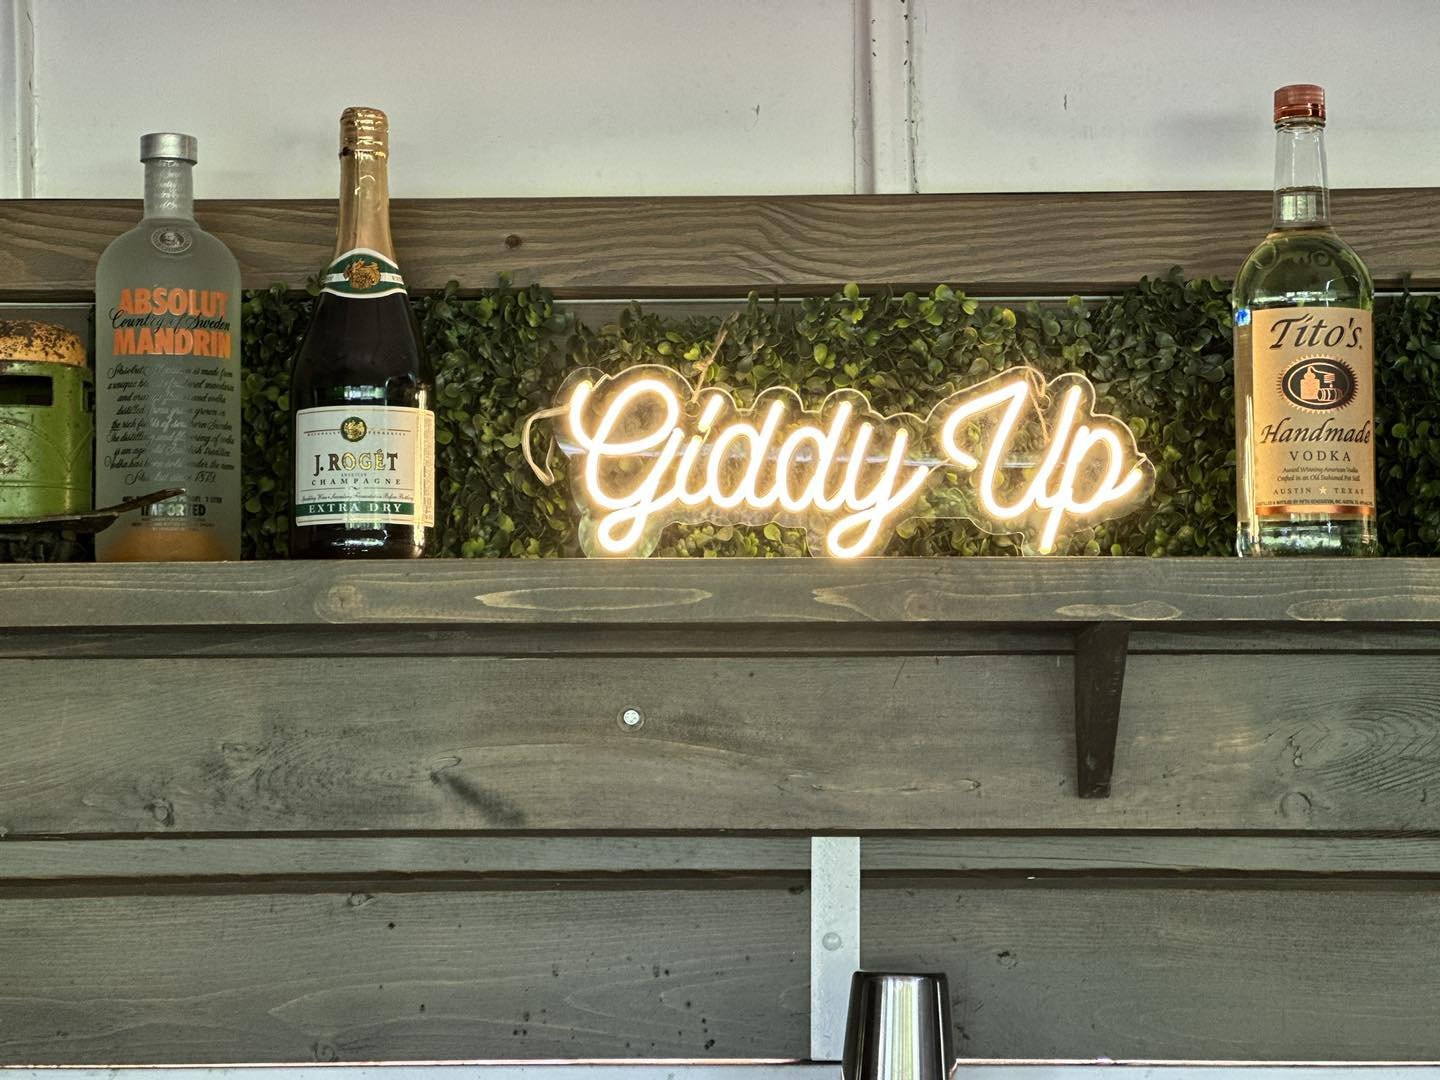 Giddy up and drink up!! We bring the bar to you with one of our vintage horse trailer bars or portable bar rentals. Don&rsquo;t need a bar? We can just bartend too!! 

Check out our website at www.pourponybar.com for instant quotes. 

#vintagehorsetr